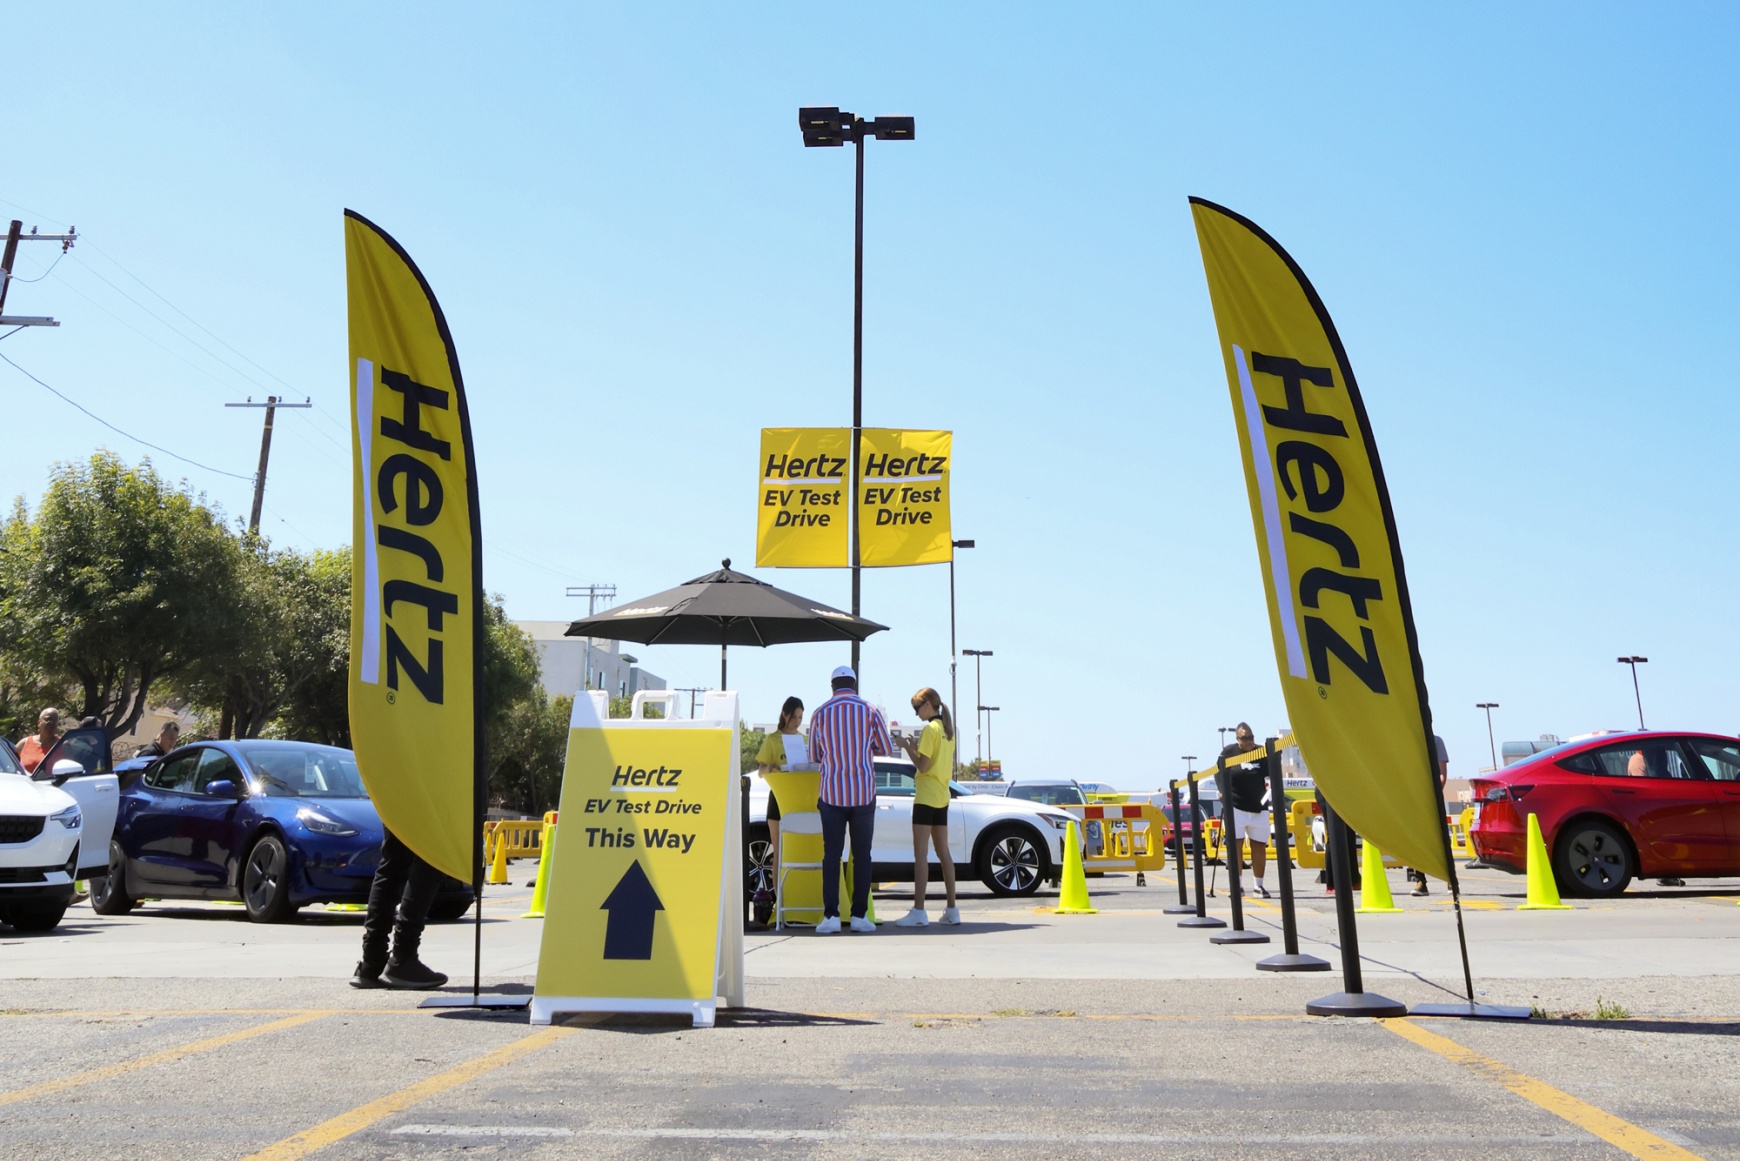 Hertz Hosts One of the Largest EV Test Drives in the US